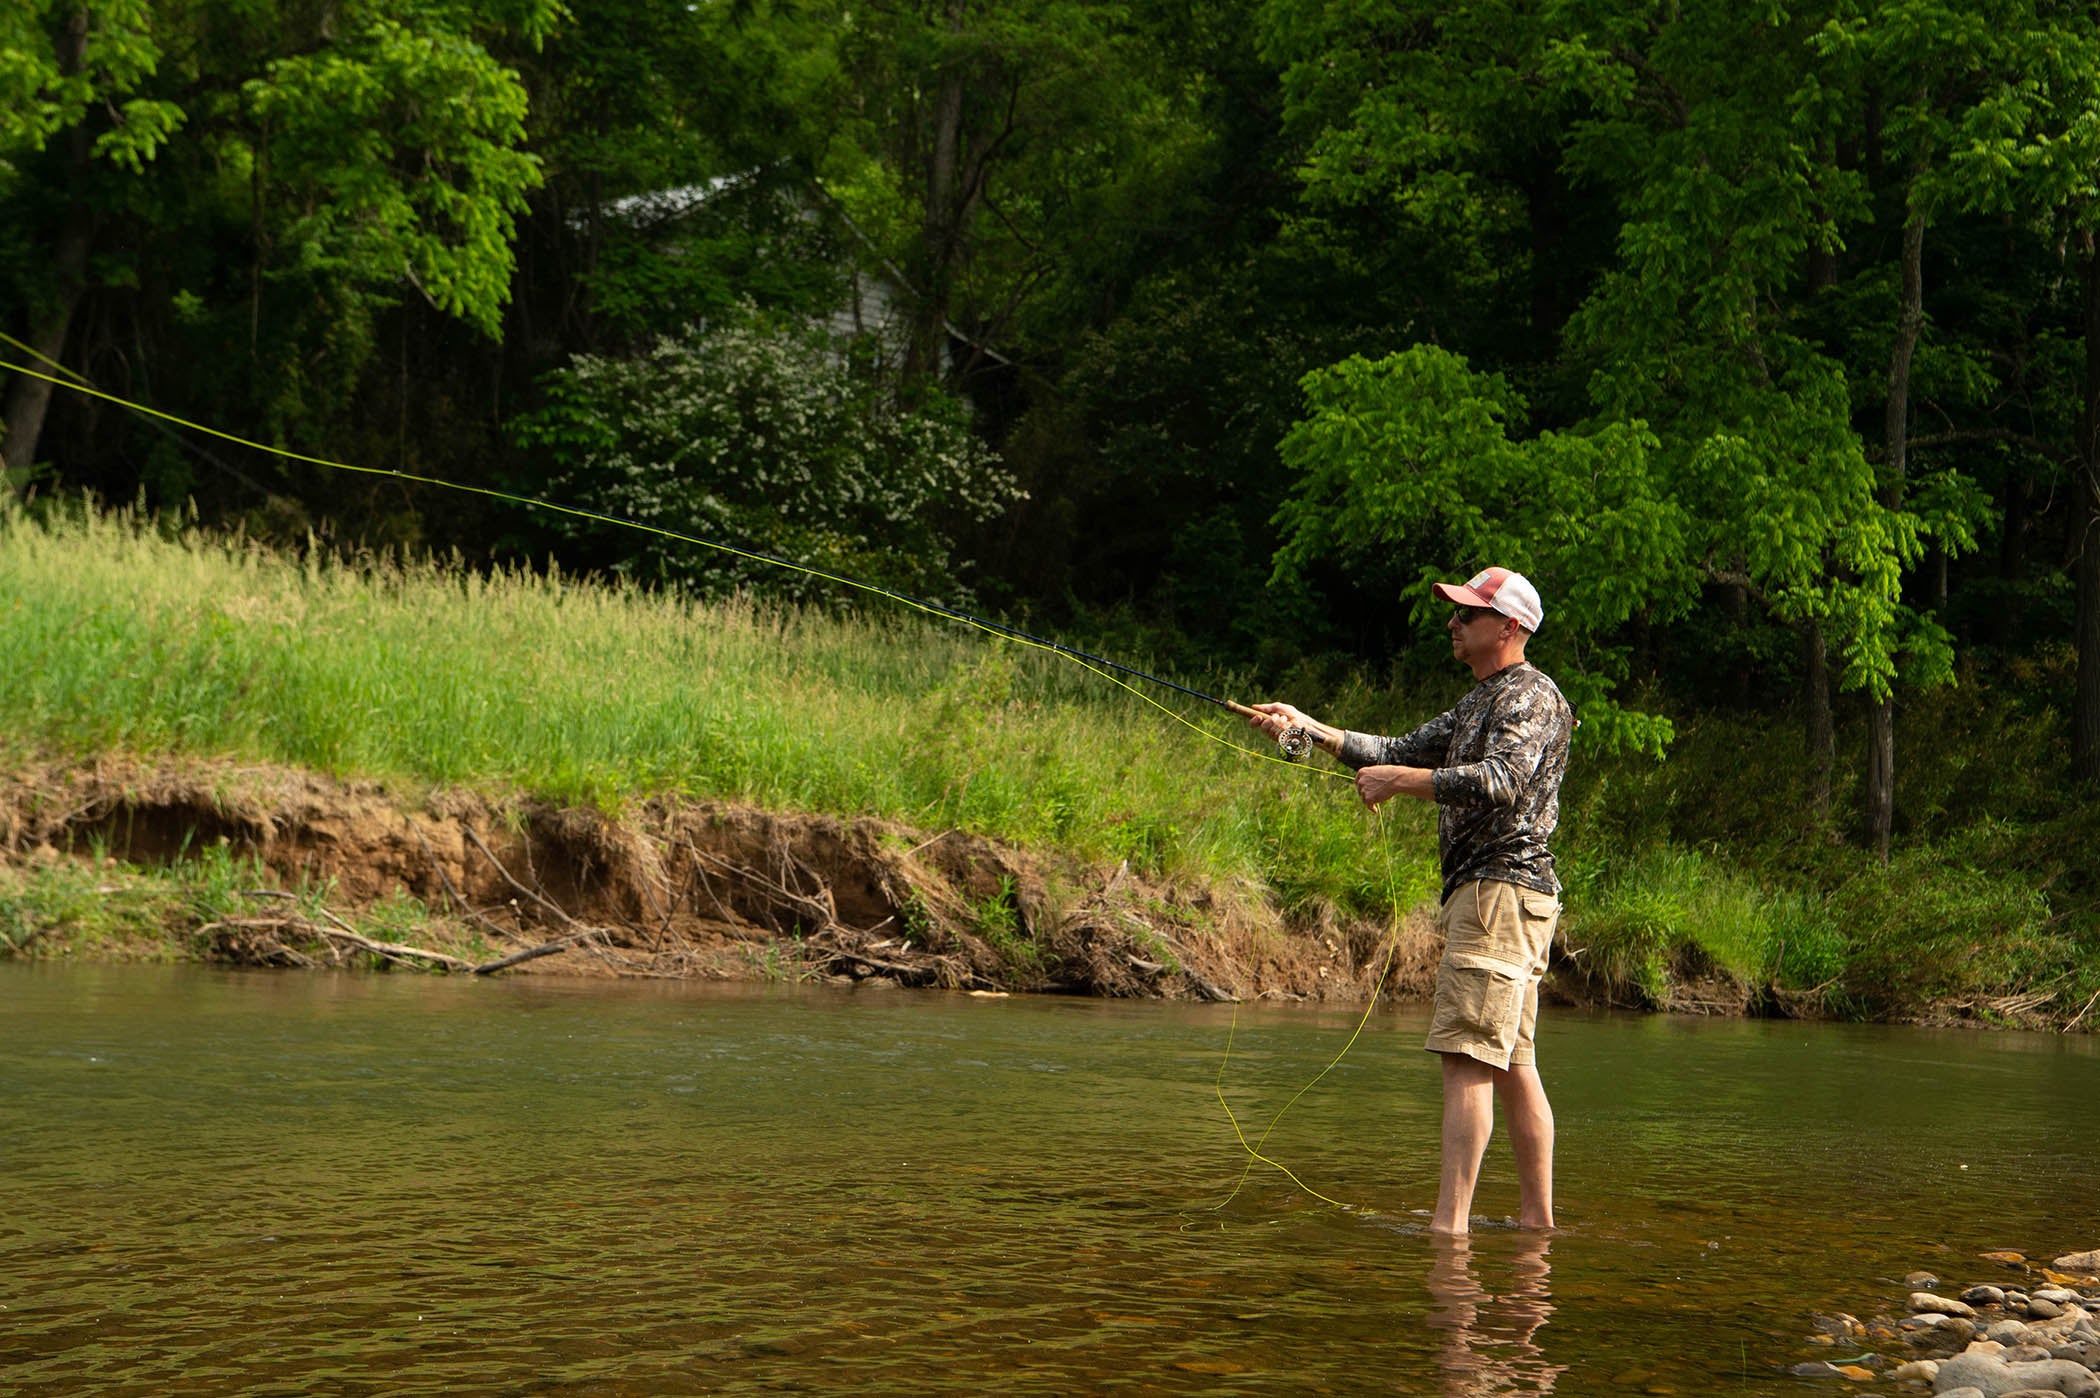 Keeper' season on delayed-harvest trout waters opens in 10 days